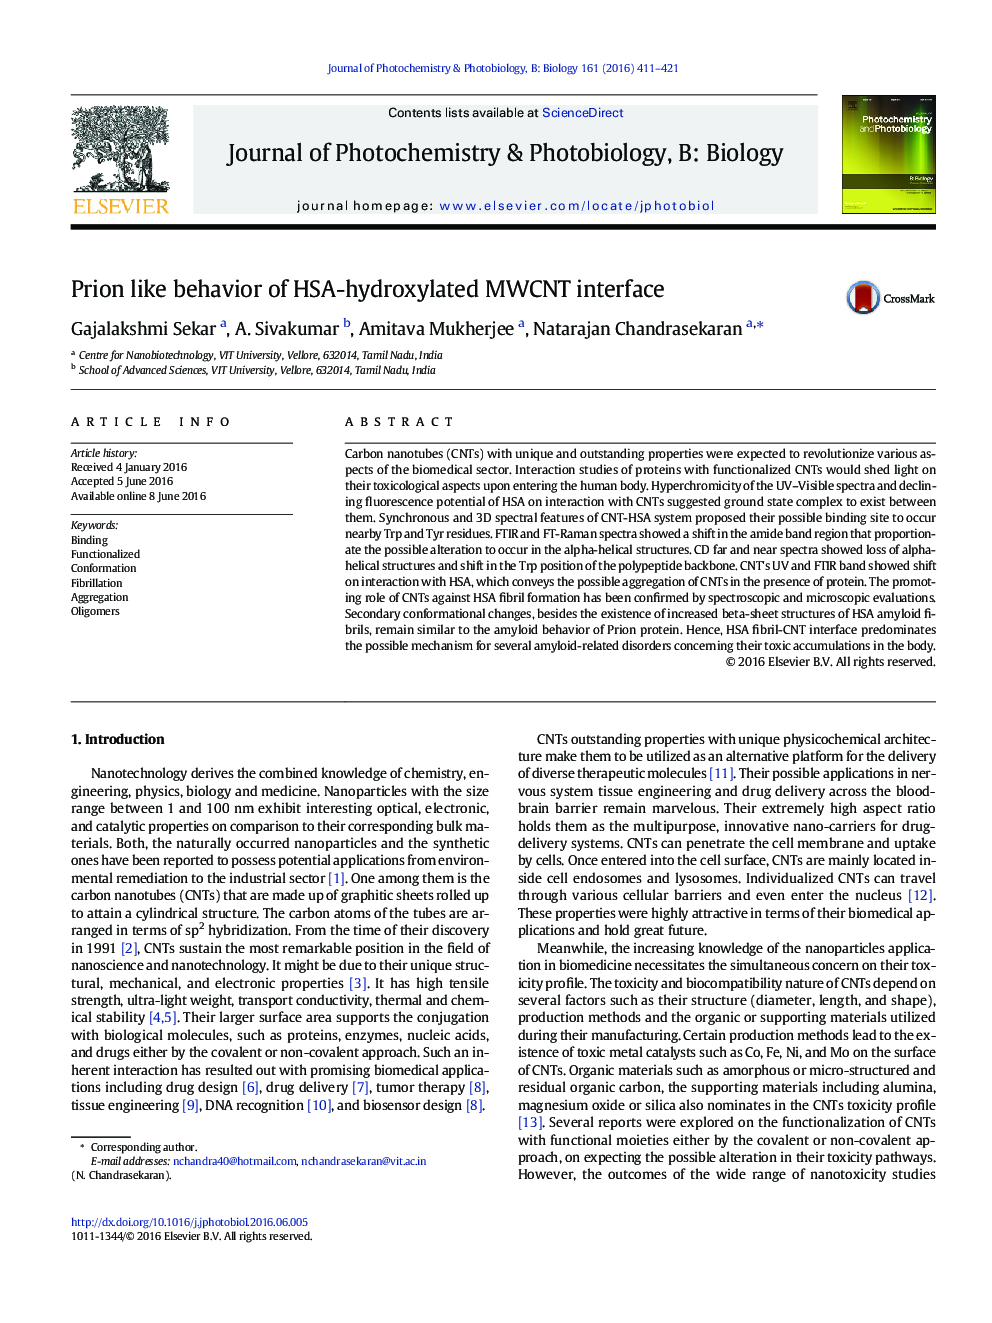 Prion like behavior of HSA-hydroxylated MWCNT interface